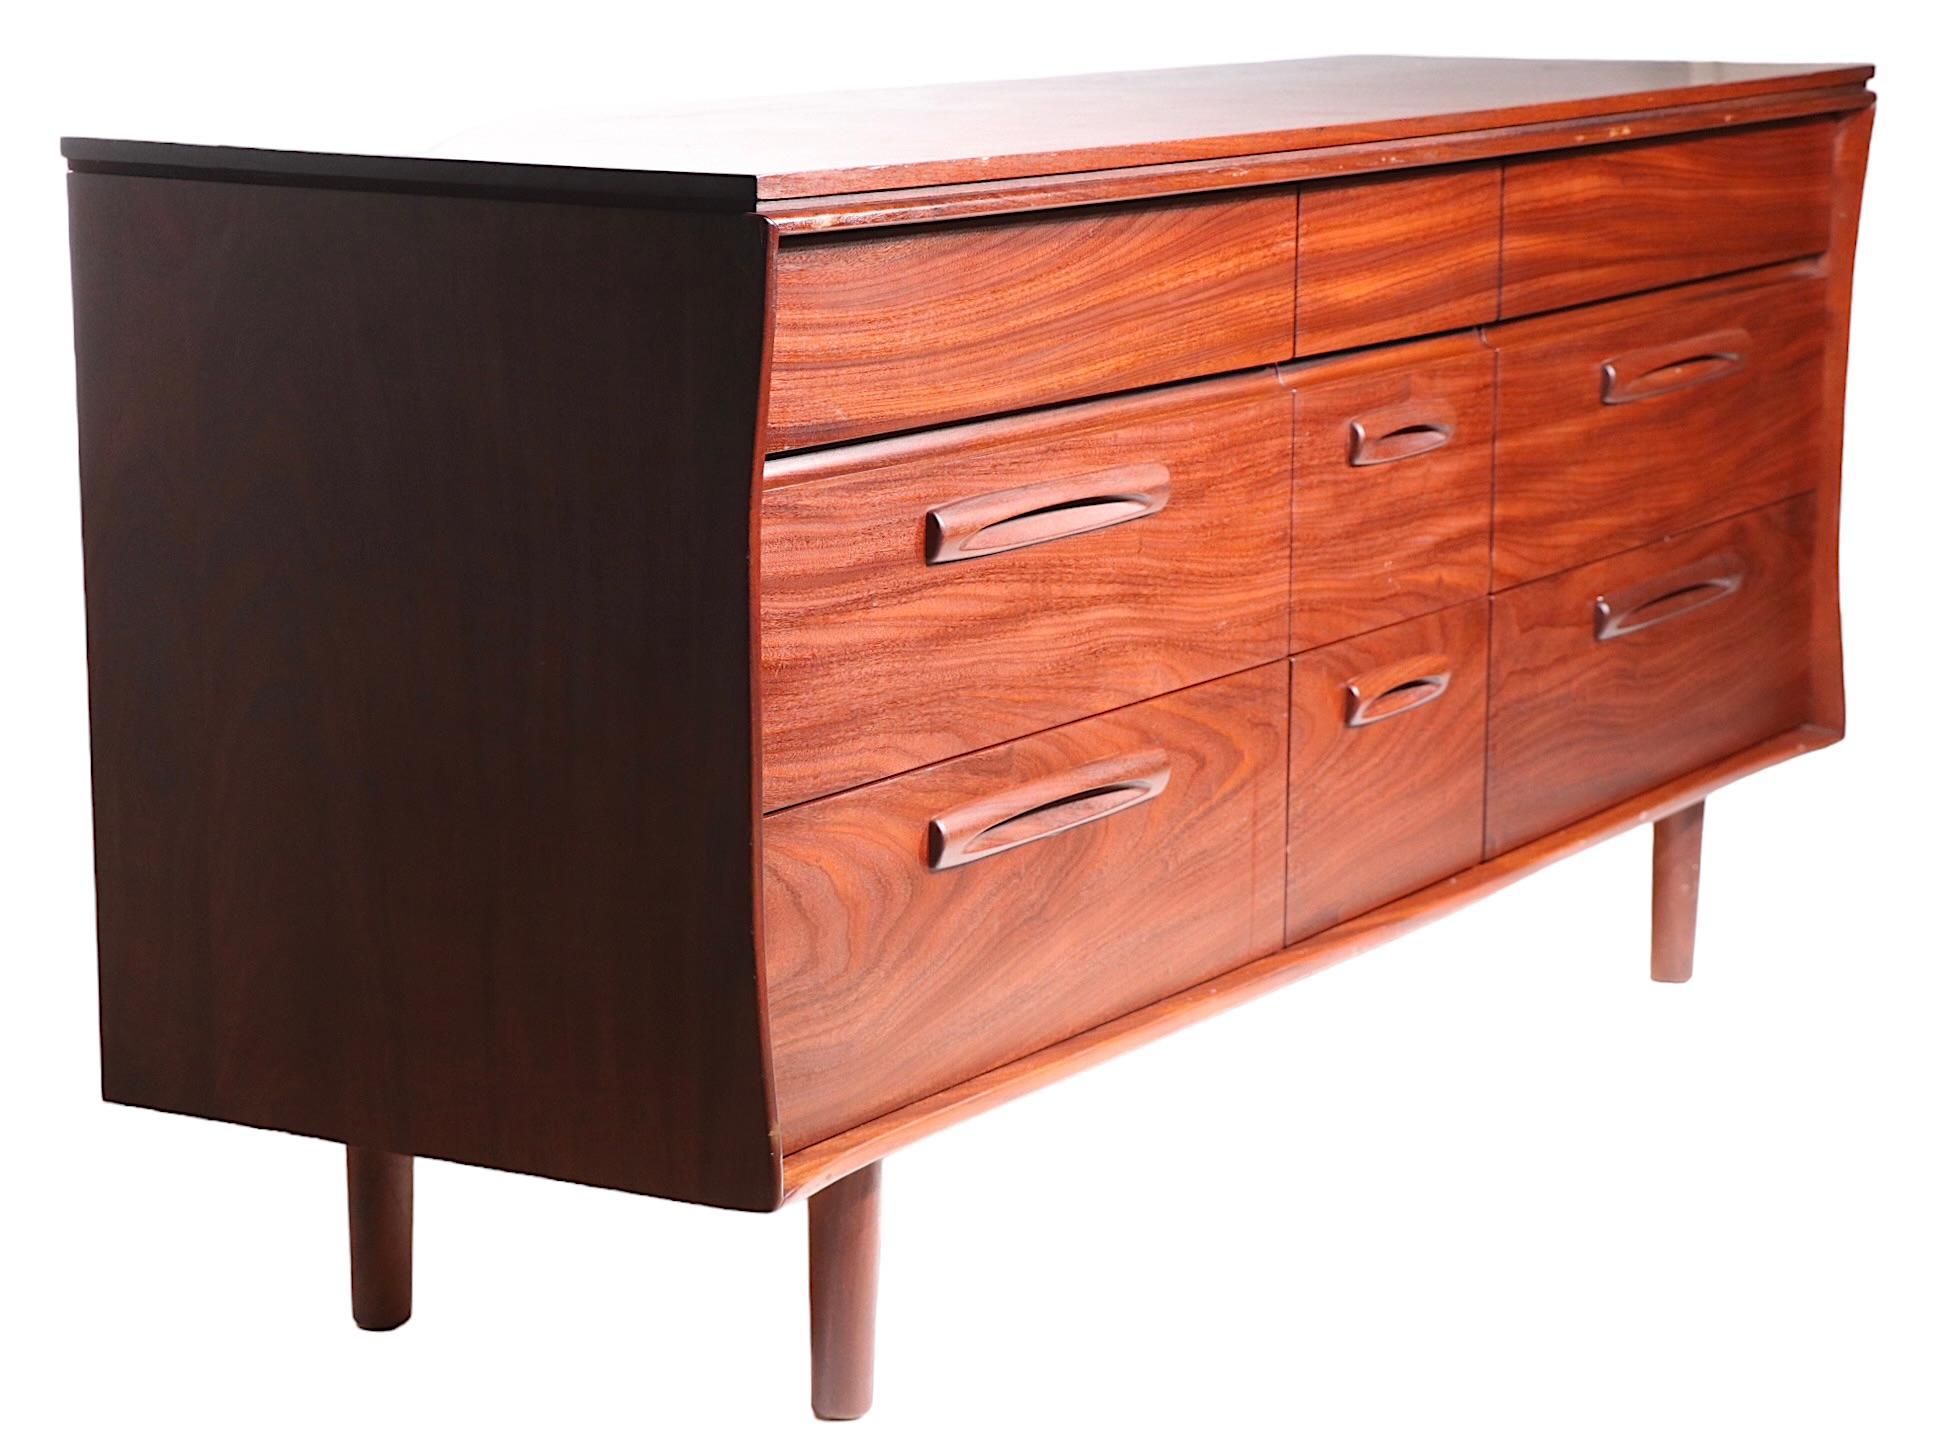 Exceptional nine drawer dresser, of solid teak  wood construction, in clean  original vintage  condition. This exceptional dresser was designed by Jan Kuypers for Imperial Stratford of Canada circa 1960's.  The case features sculpted sides, the